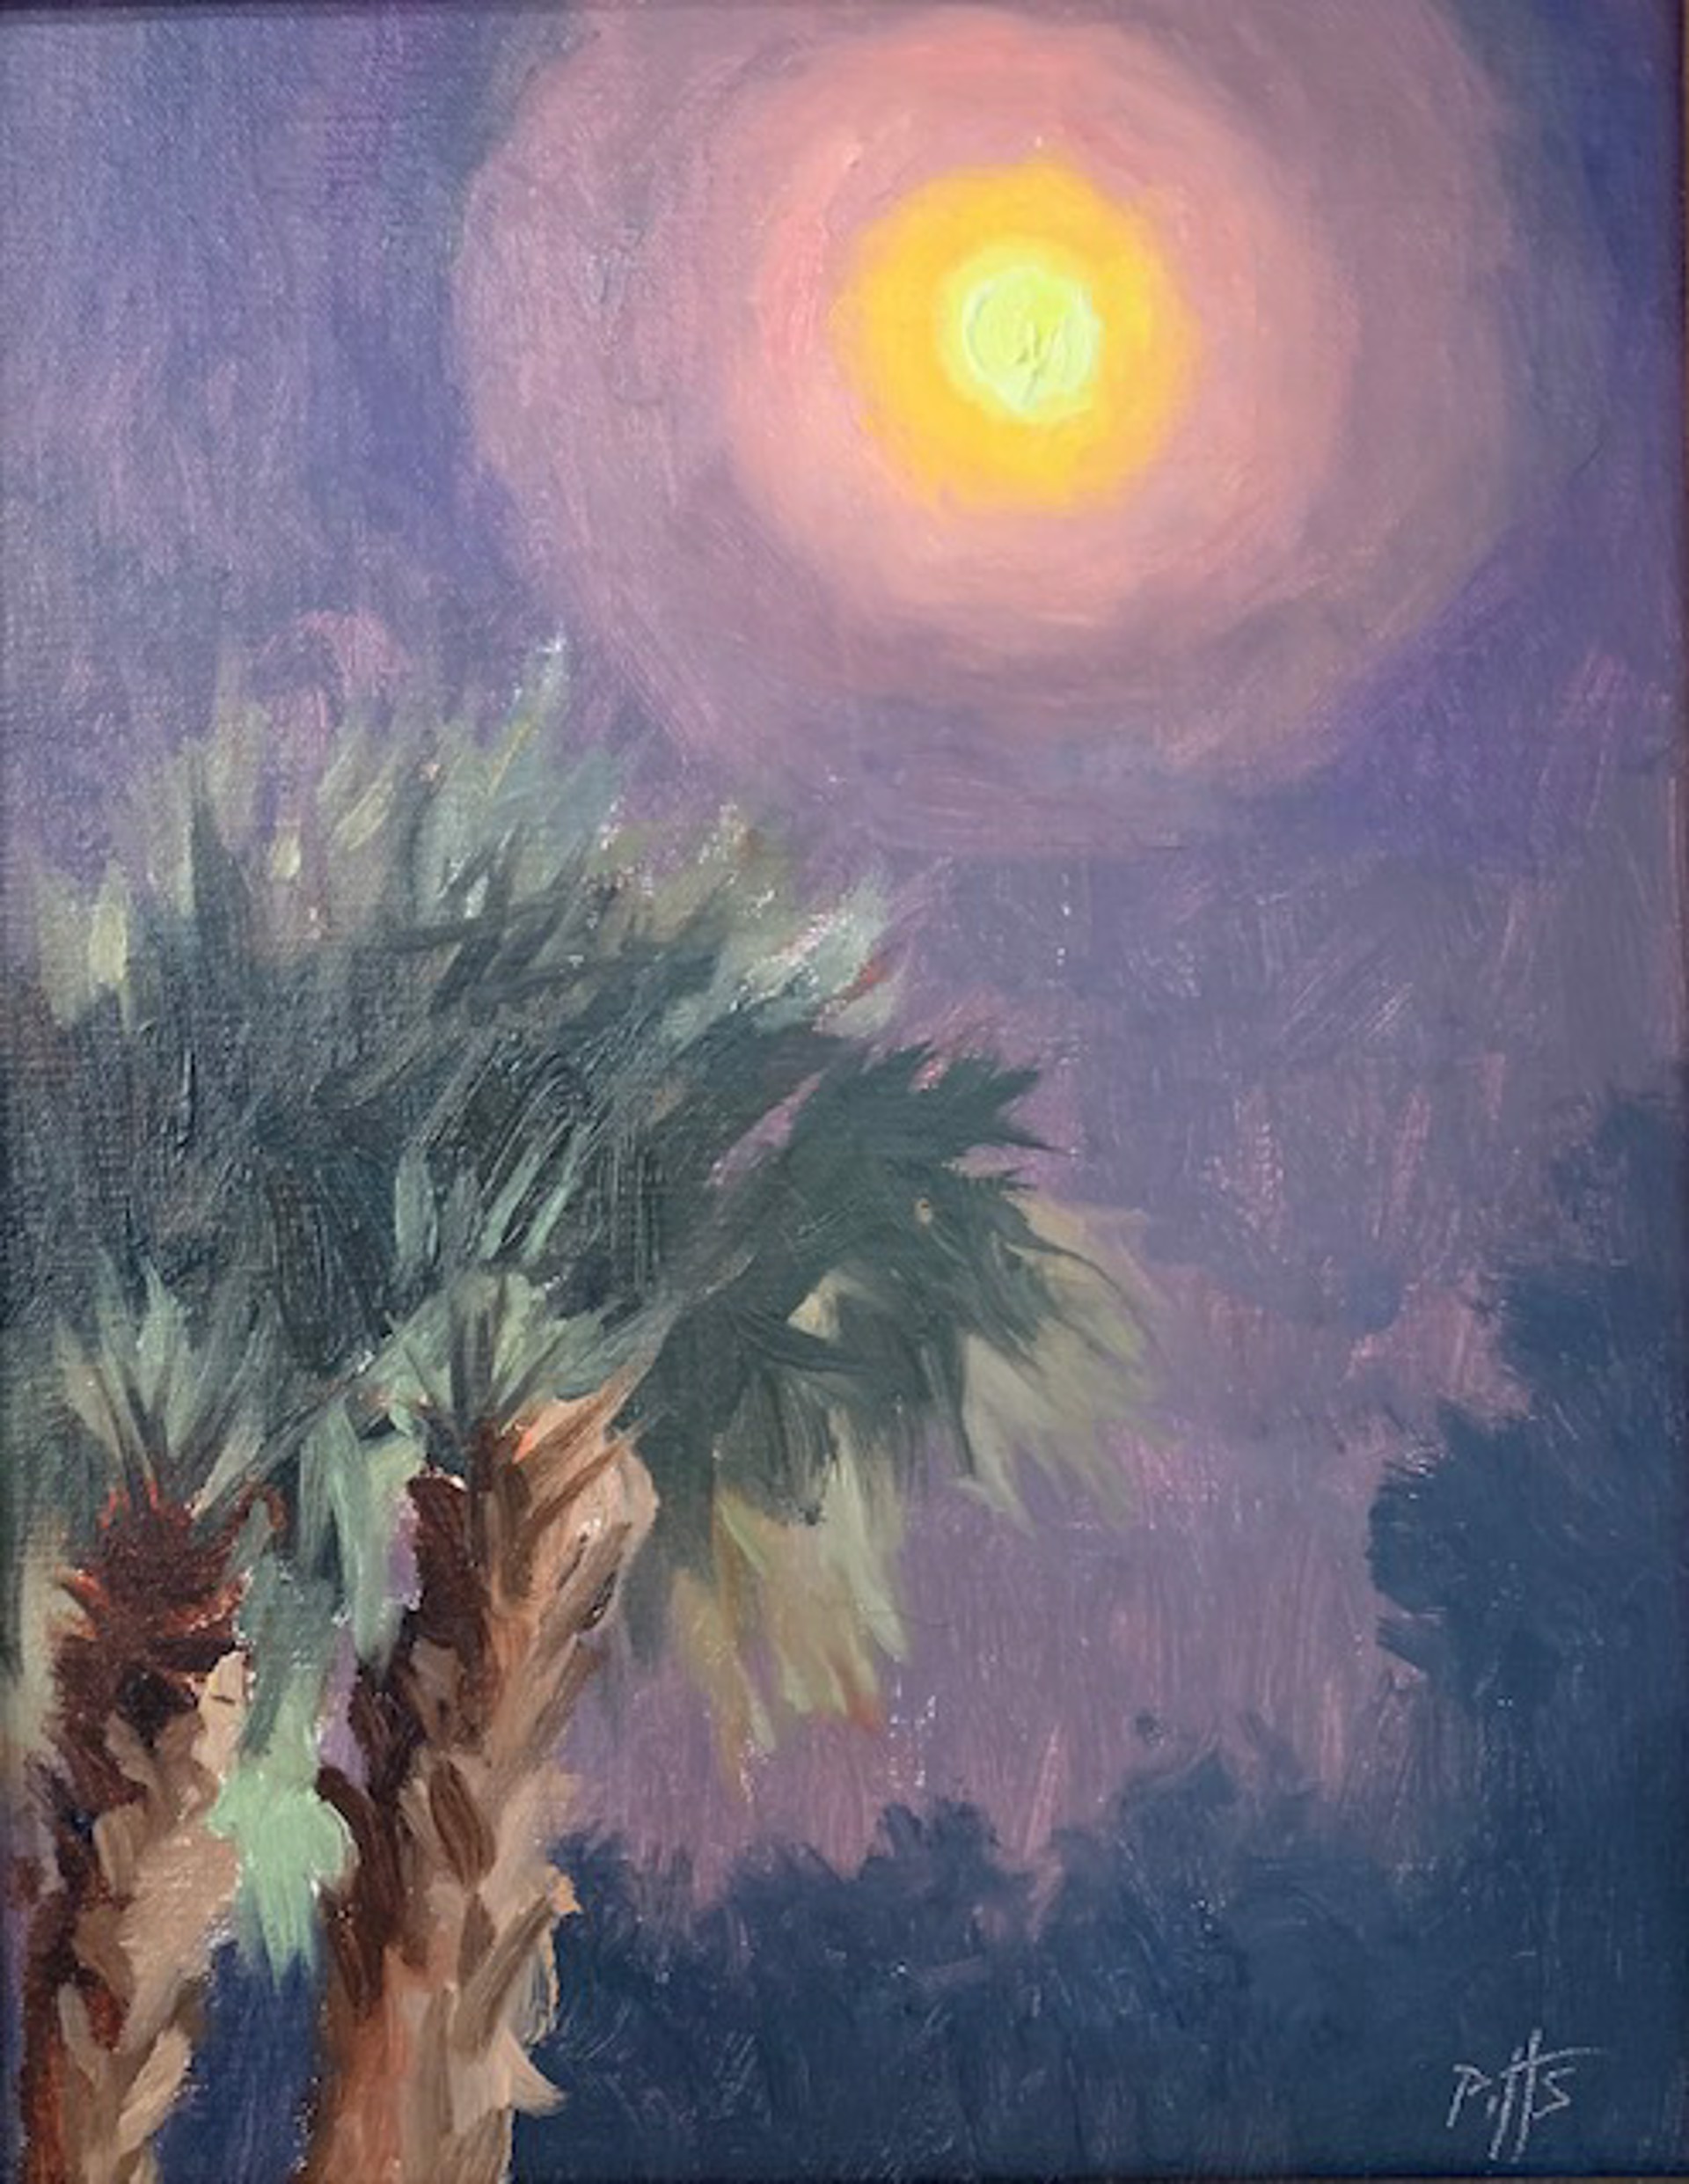 Palms Under a Full Moon by Randy Pitts